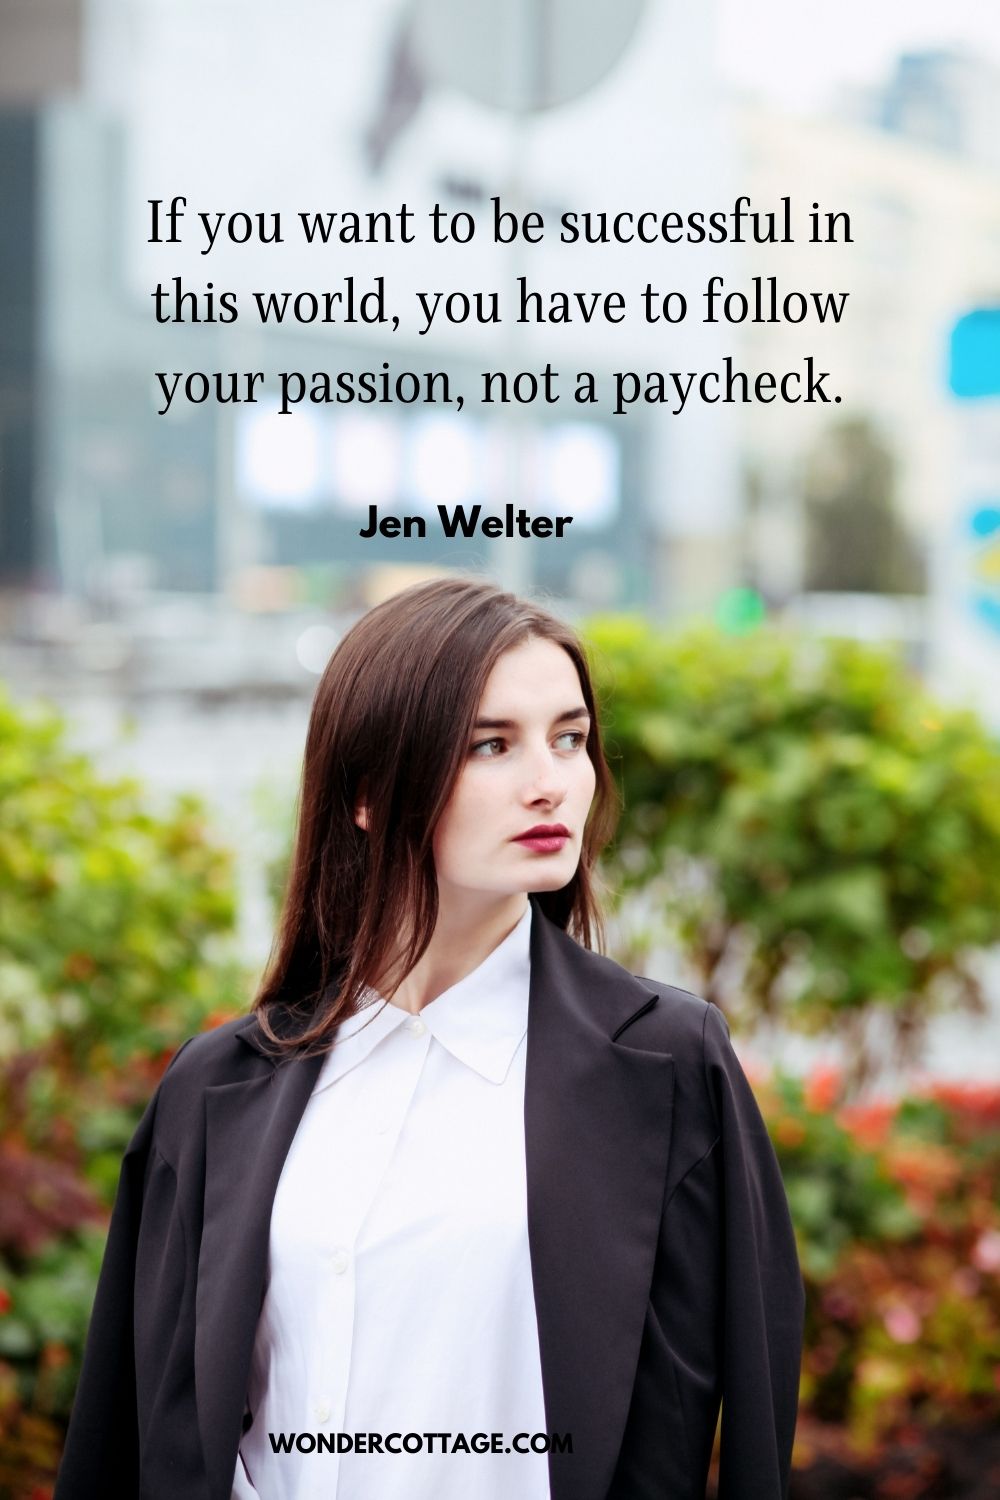 If you want to be successful in this world, you have to follow your passion, not a paycheck. Jen Welter